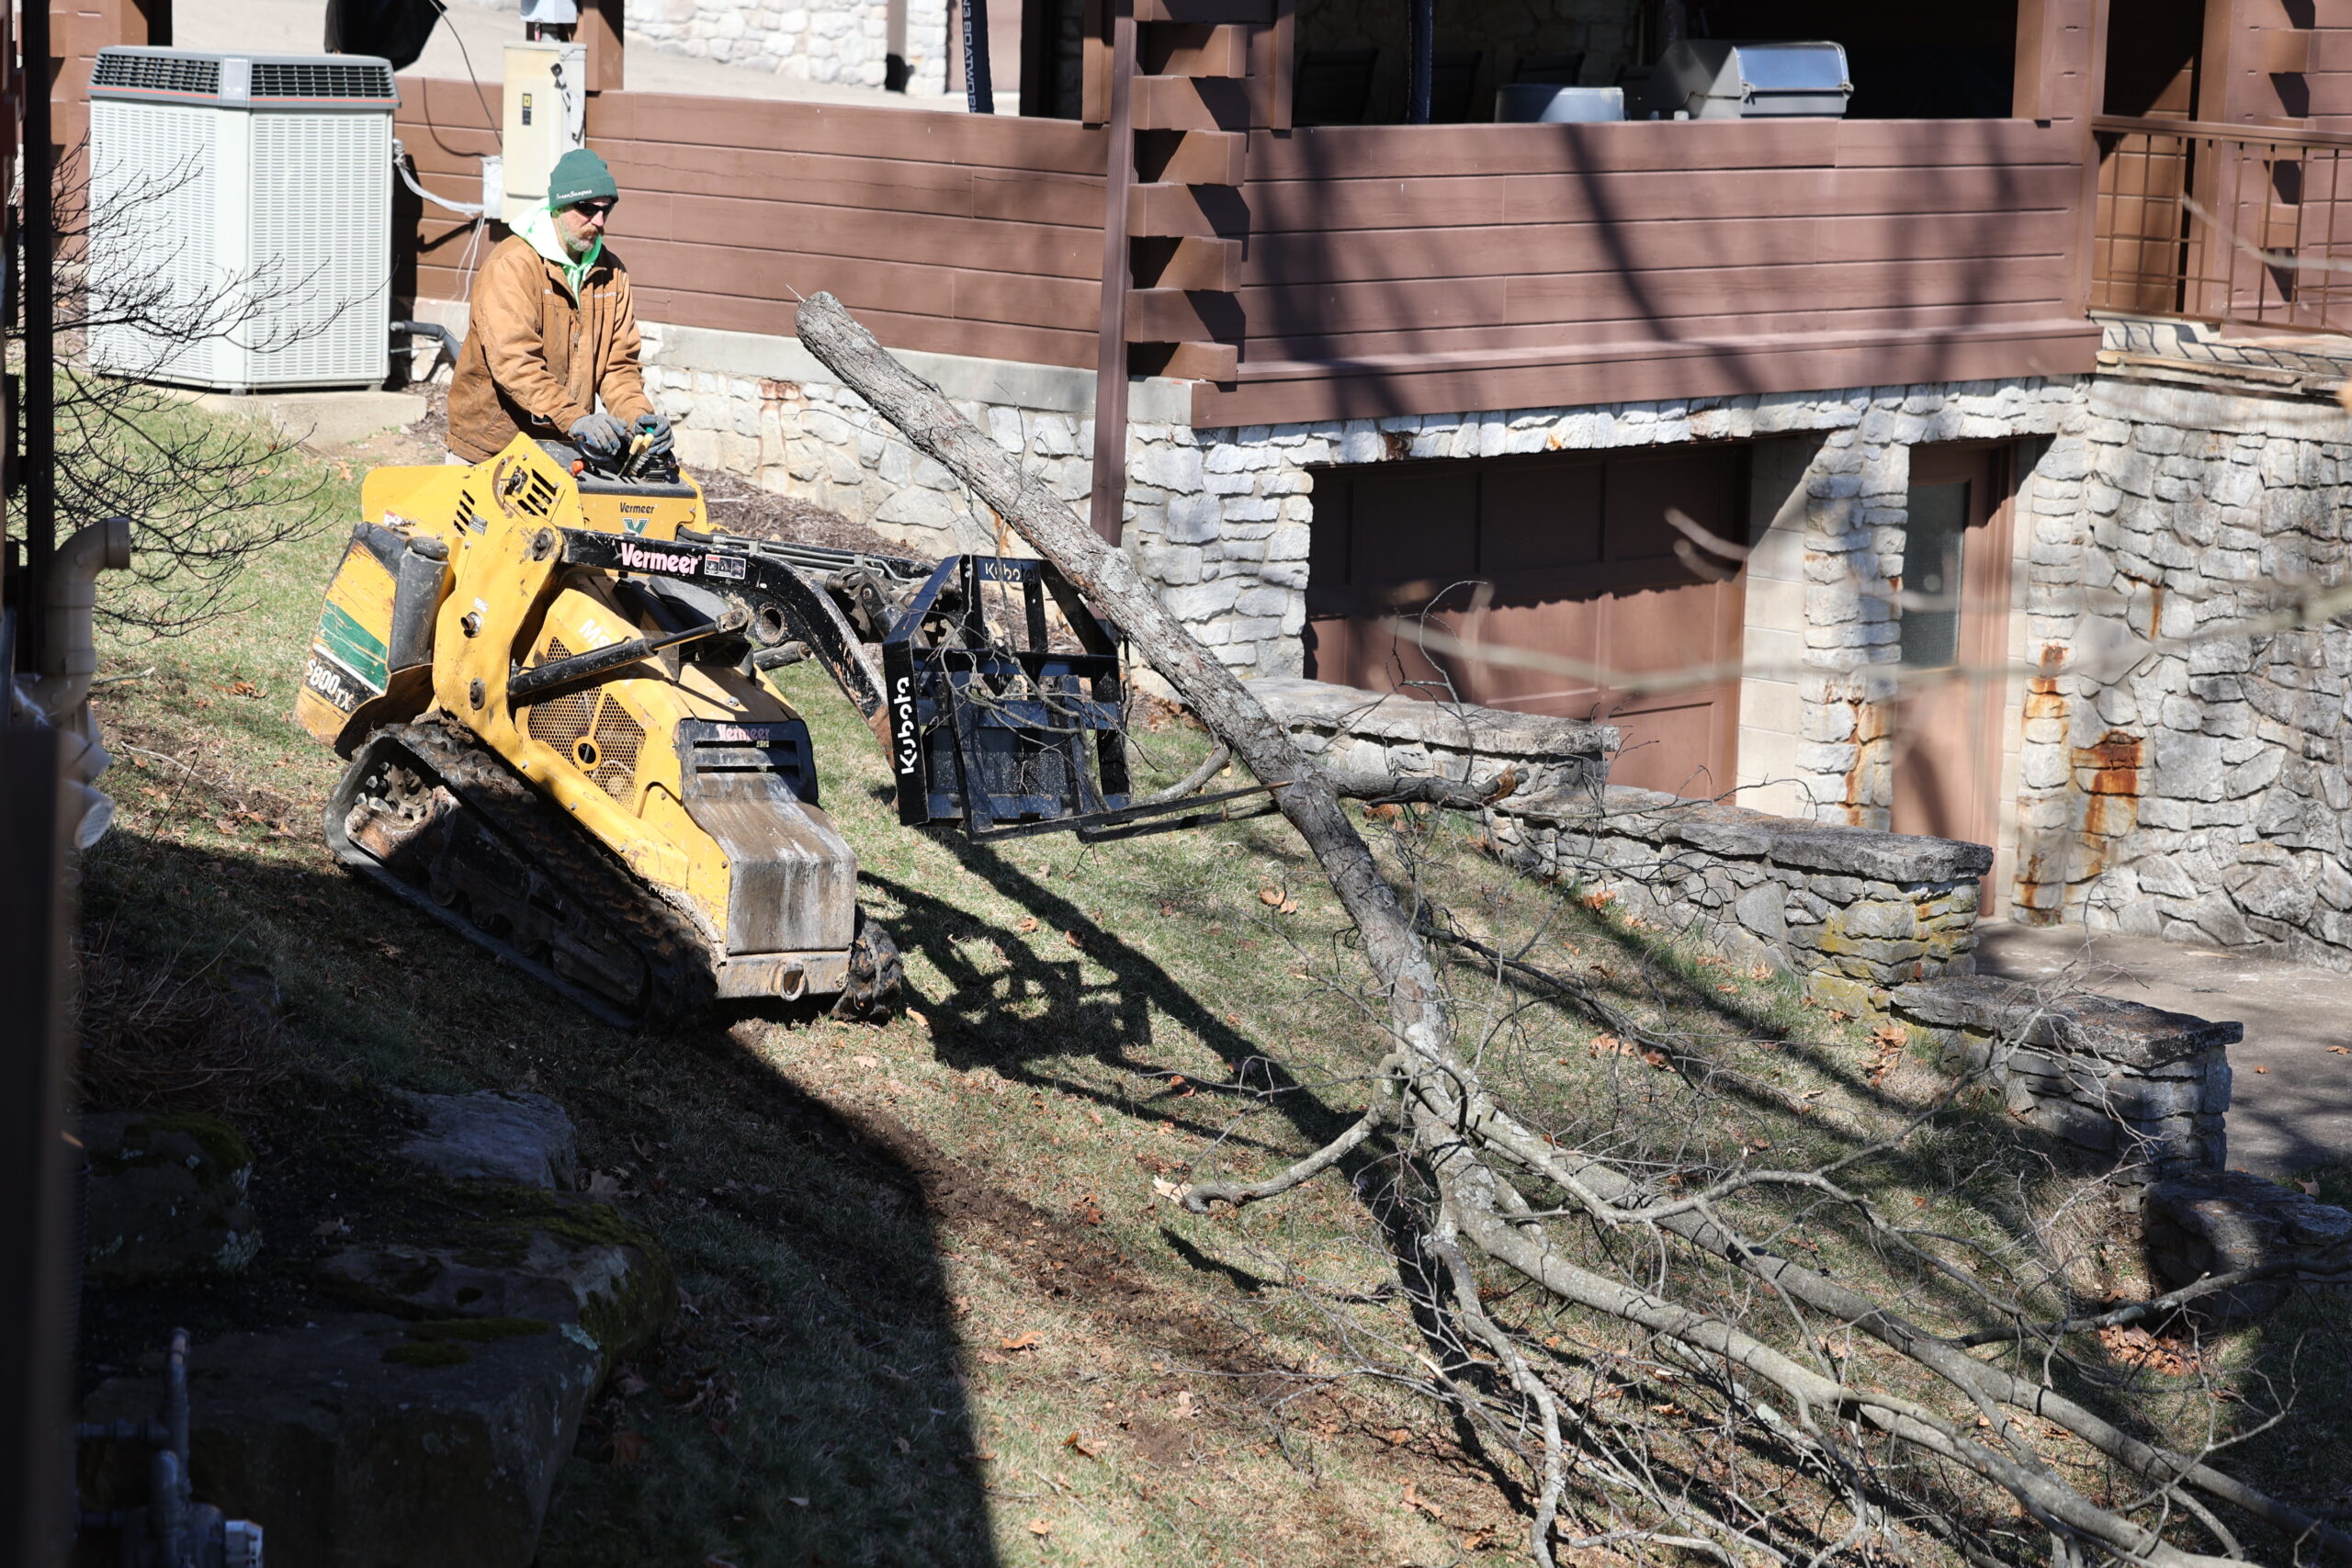 Worker on skid steer removing tree branches